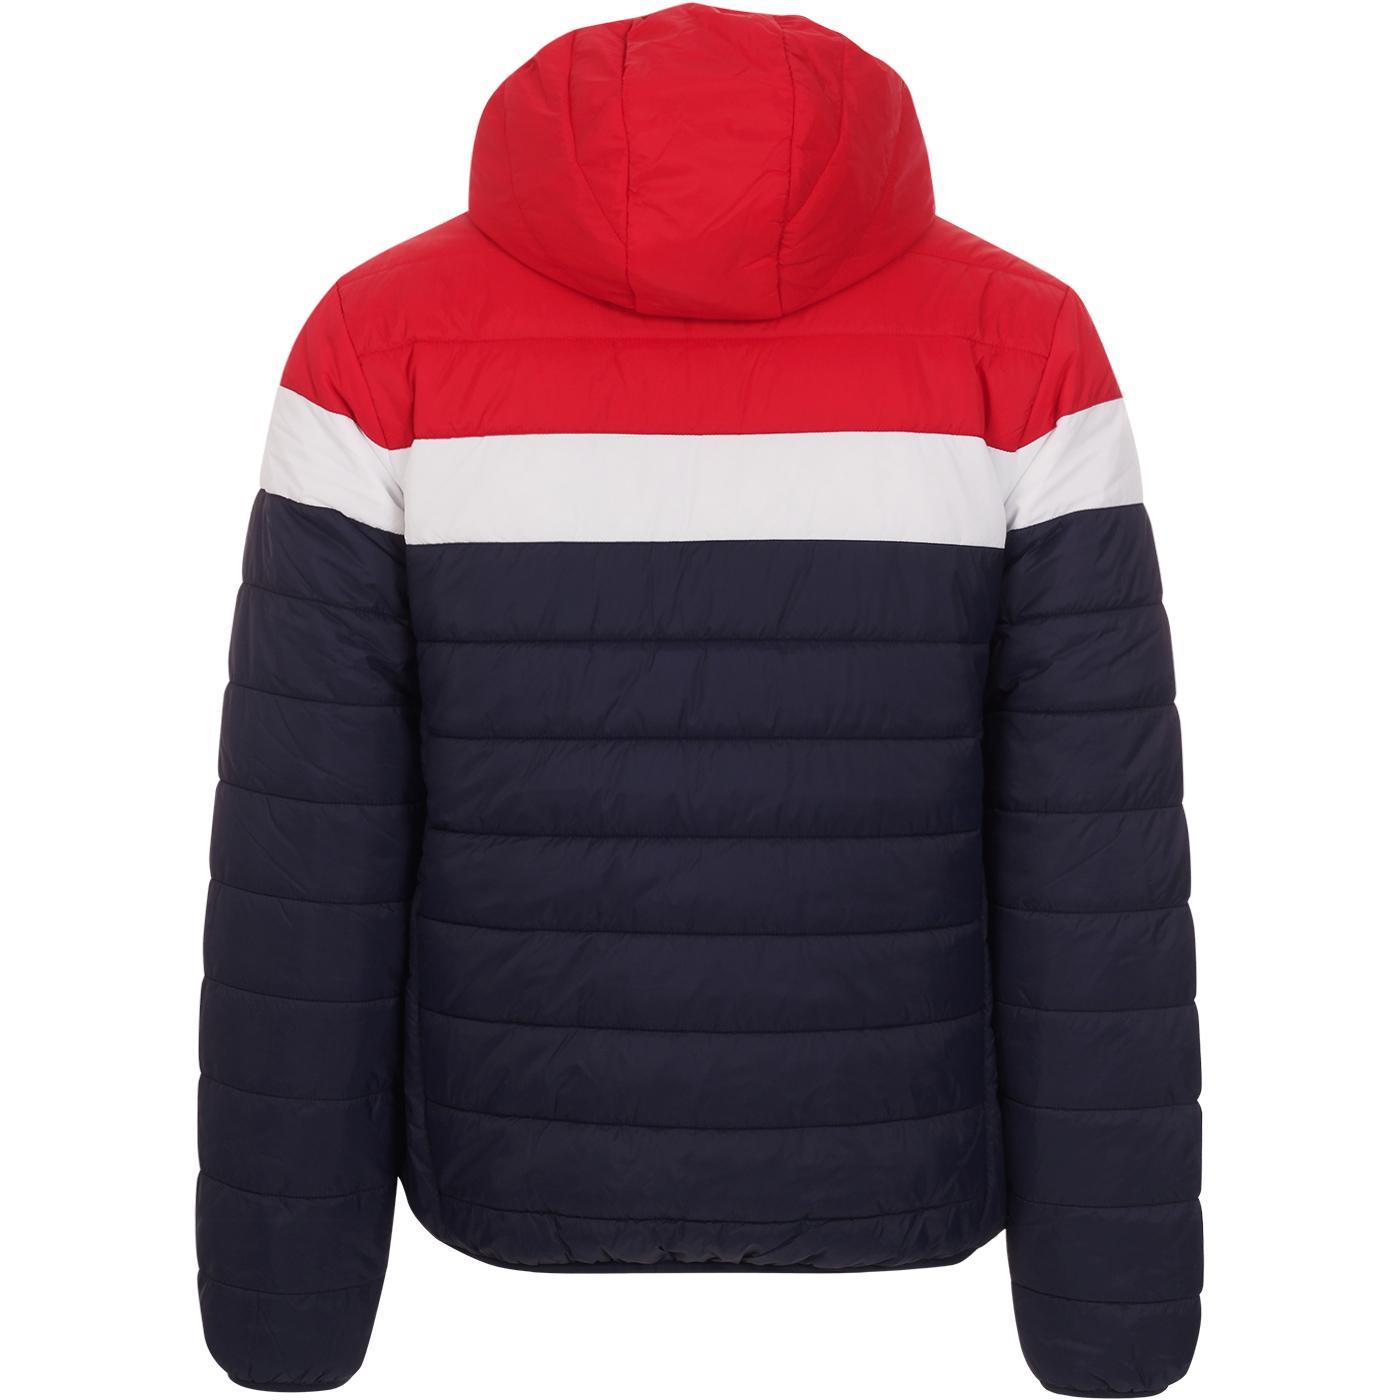 fila padded jacket with buckle fastening